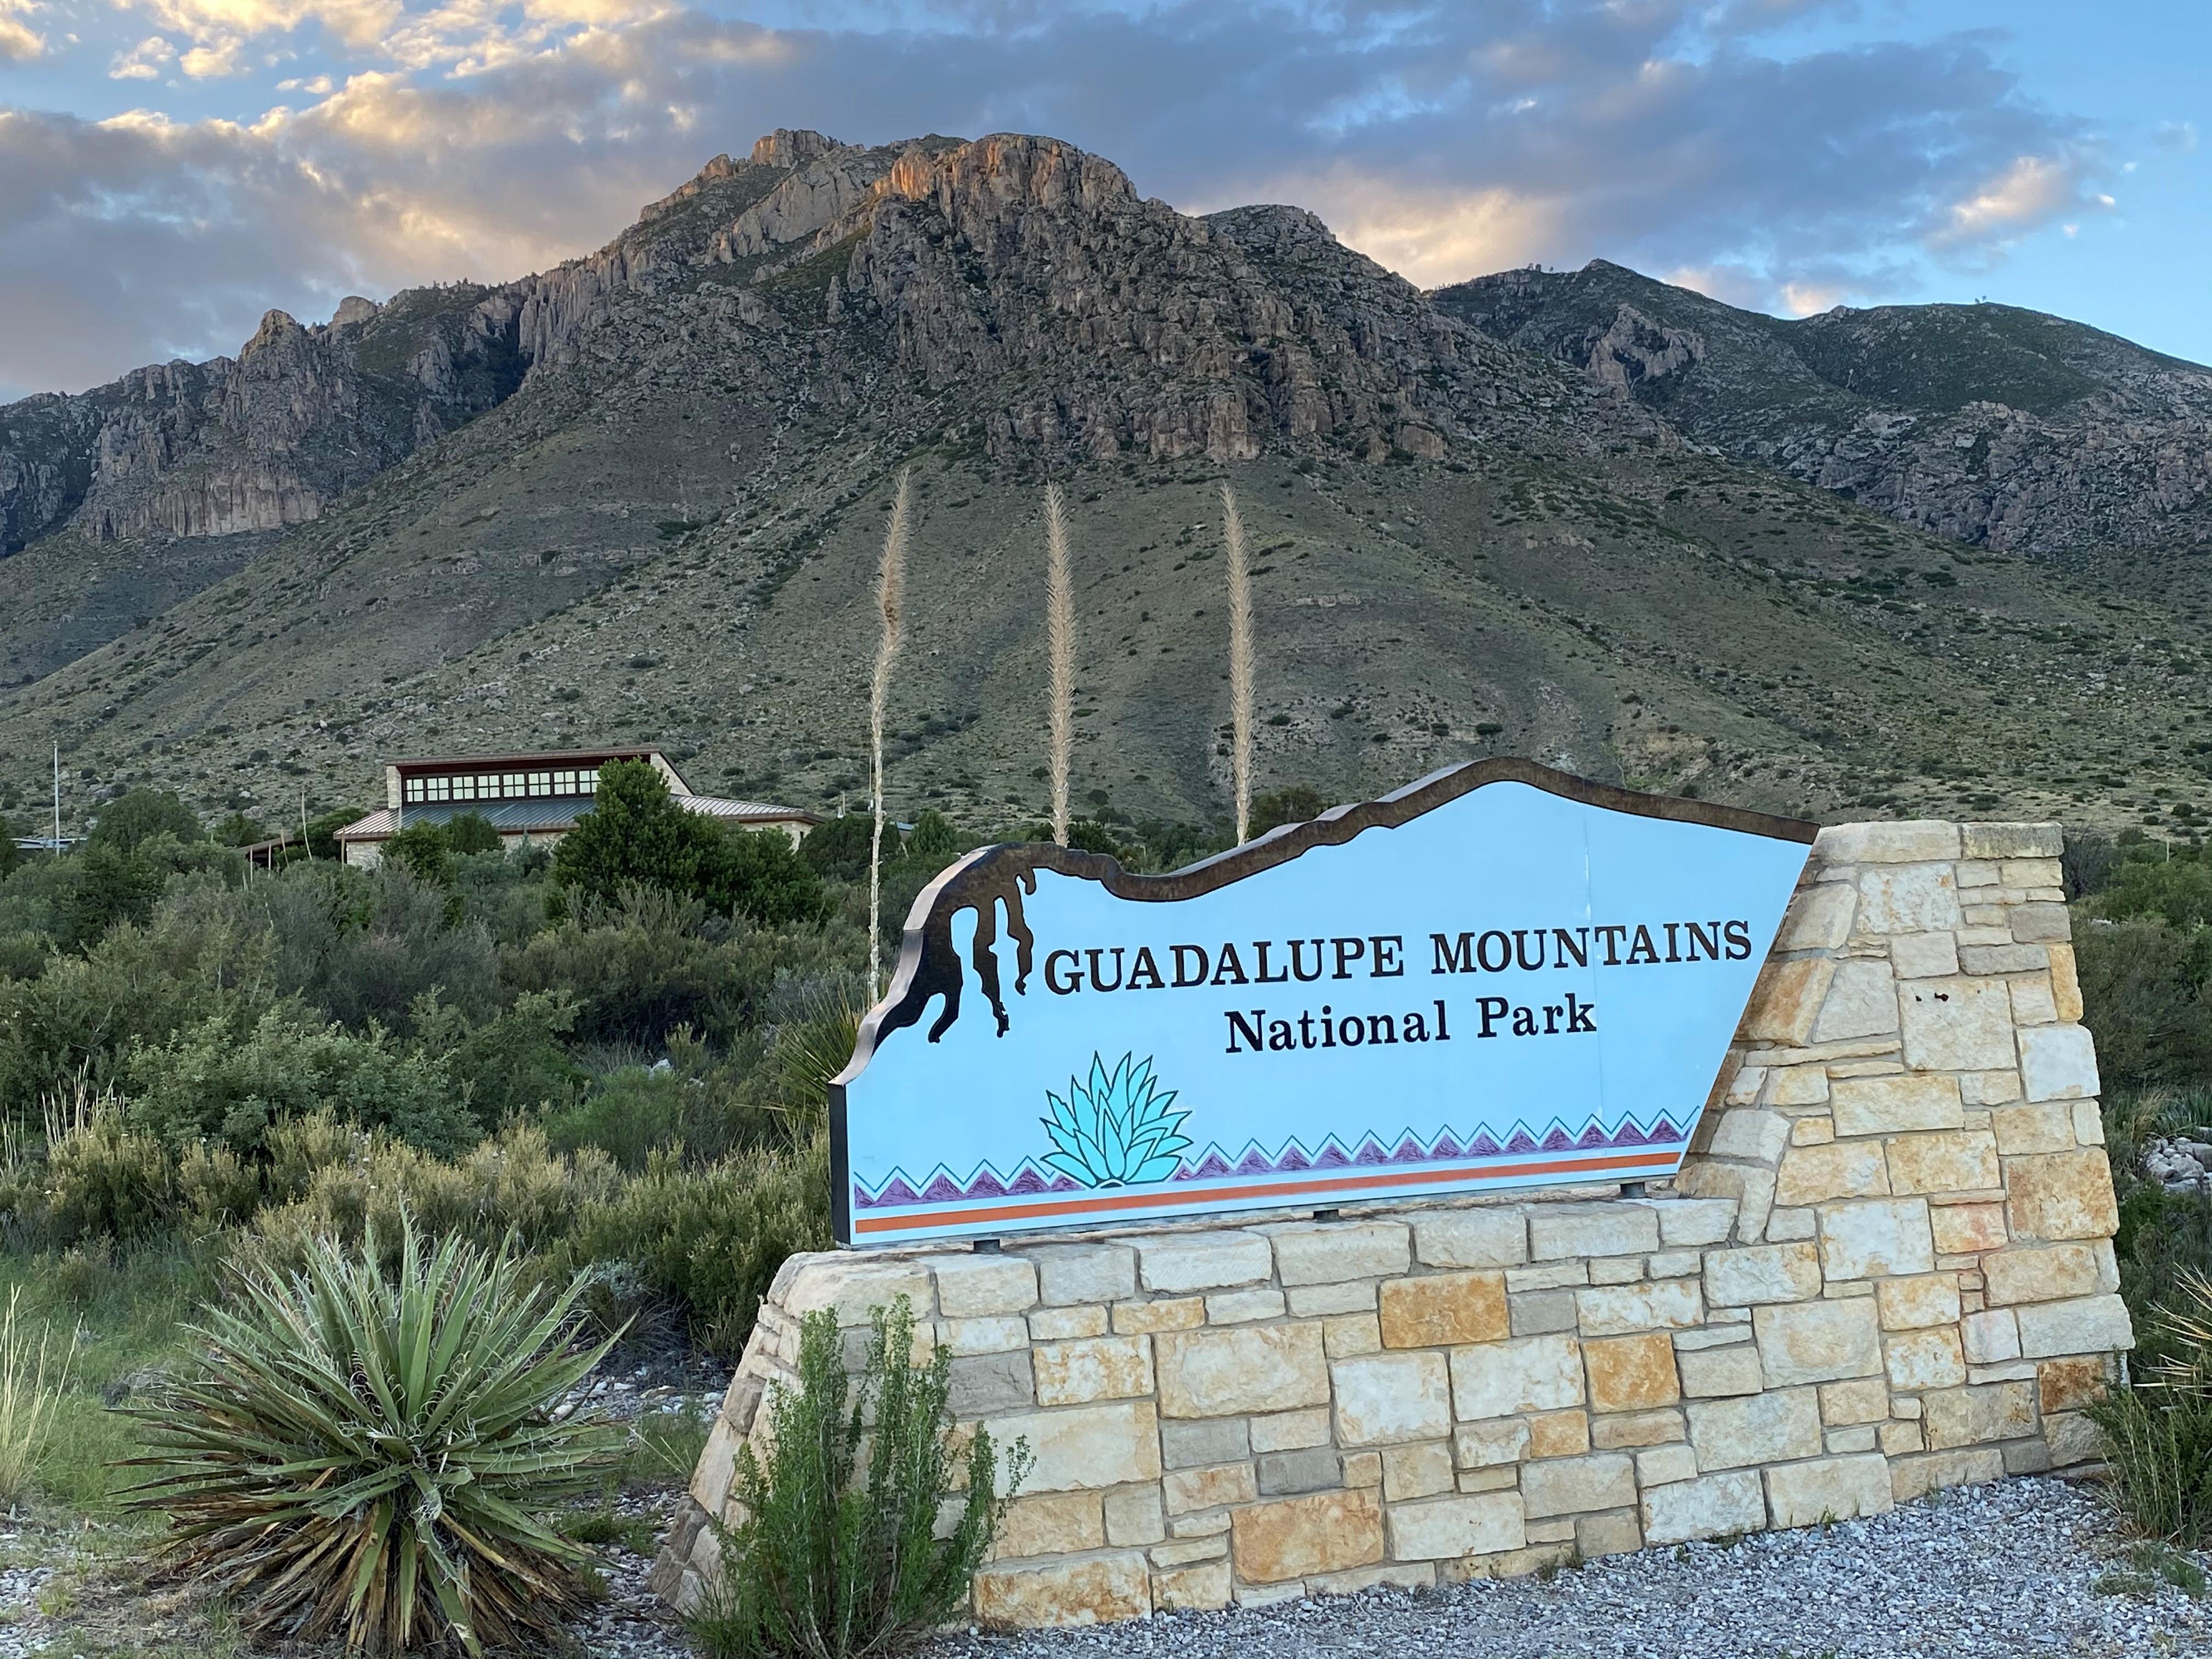 A metal and stone entrance sign stands in front of a building and desert mountains